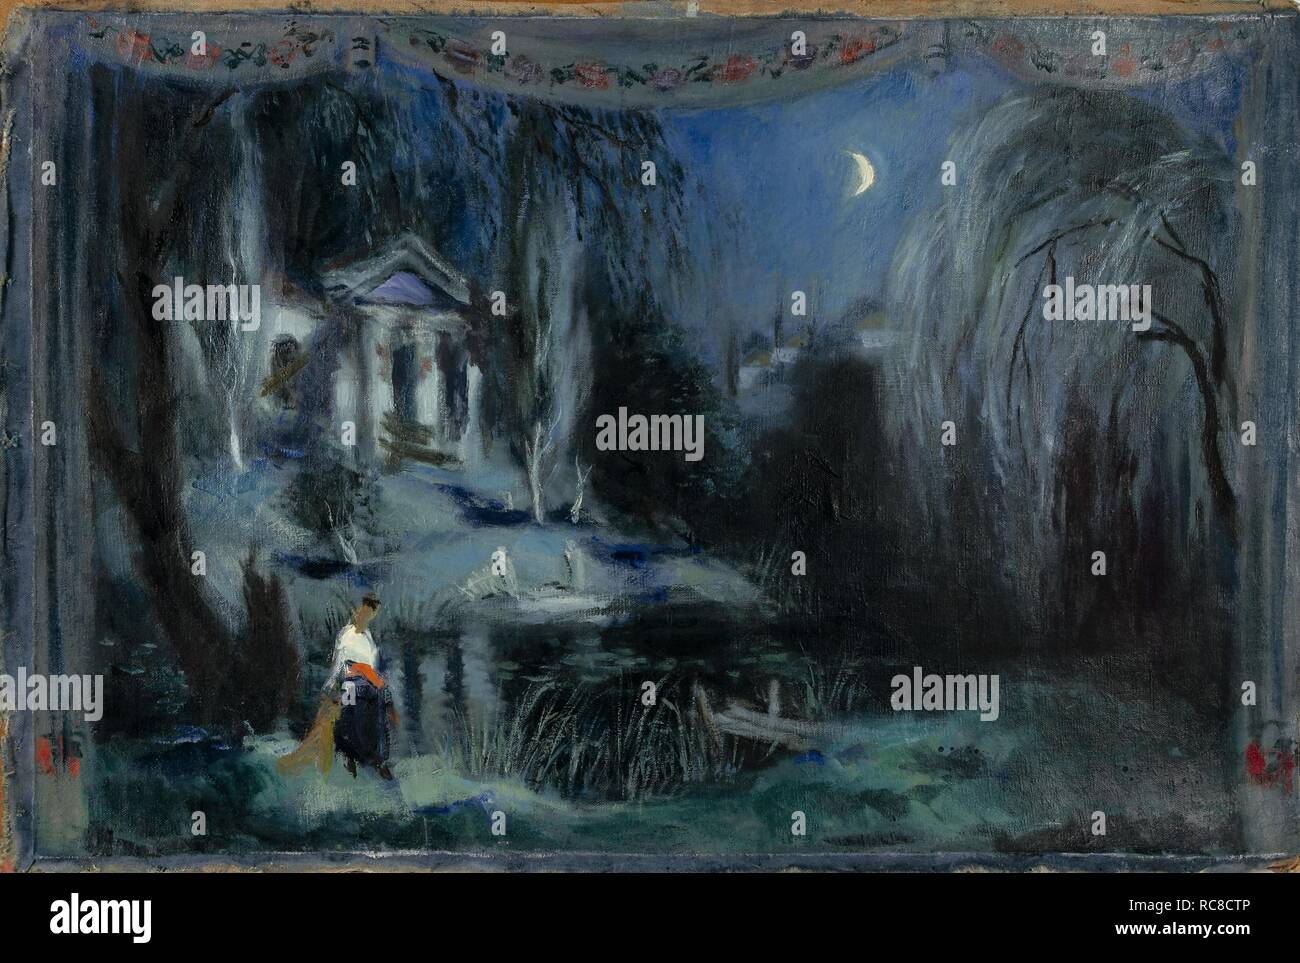 Stage design for the opera May Night by N. Rimsky-Korsakov. Museum: PRIVATE COLLECTION. Author: Sevastyanov, Ivan Vasilyevich. Stock Photo